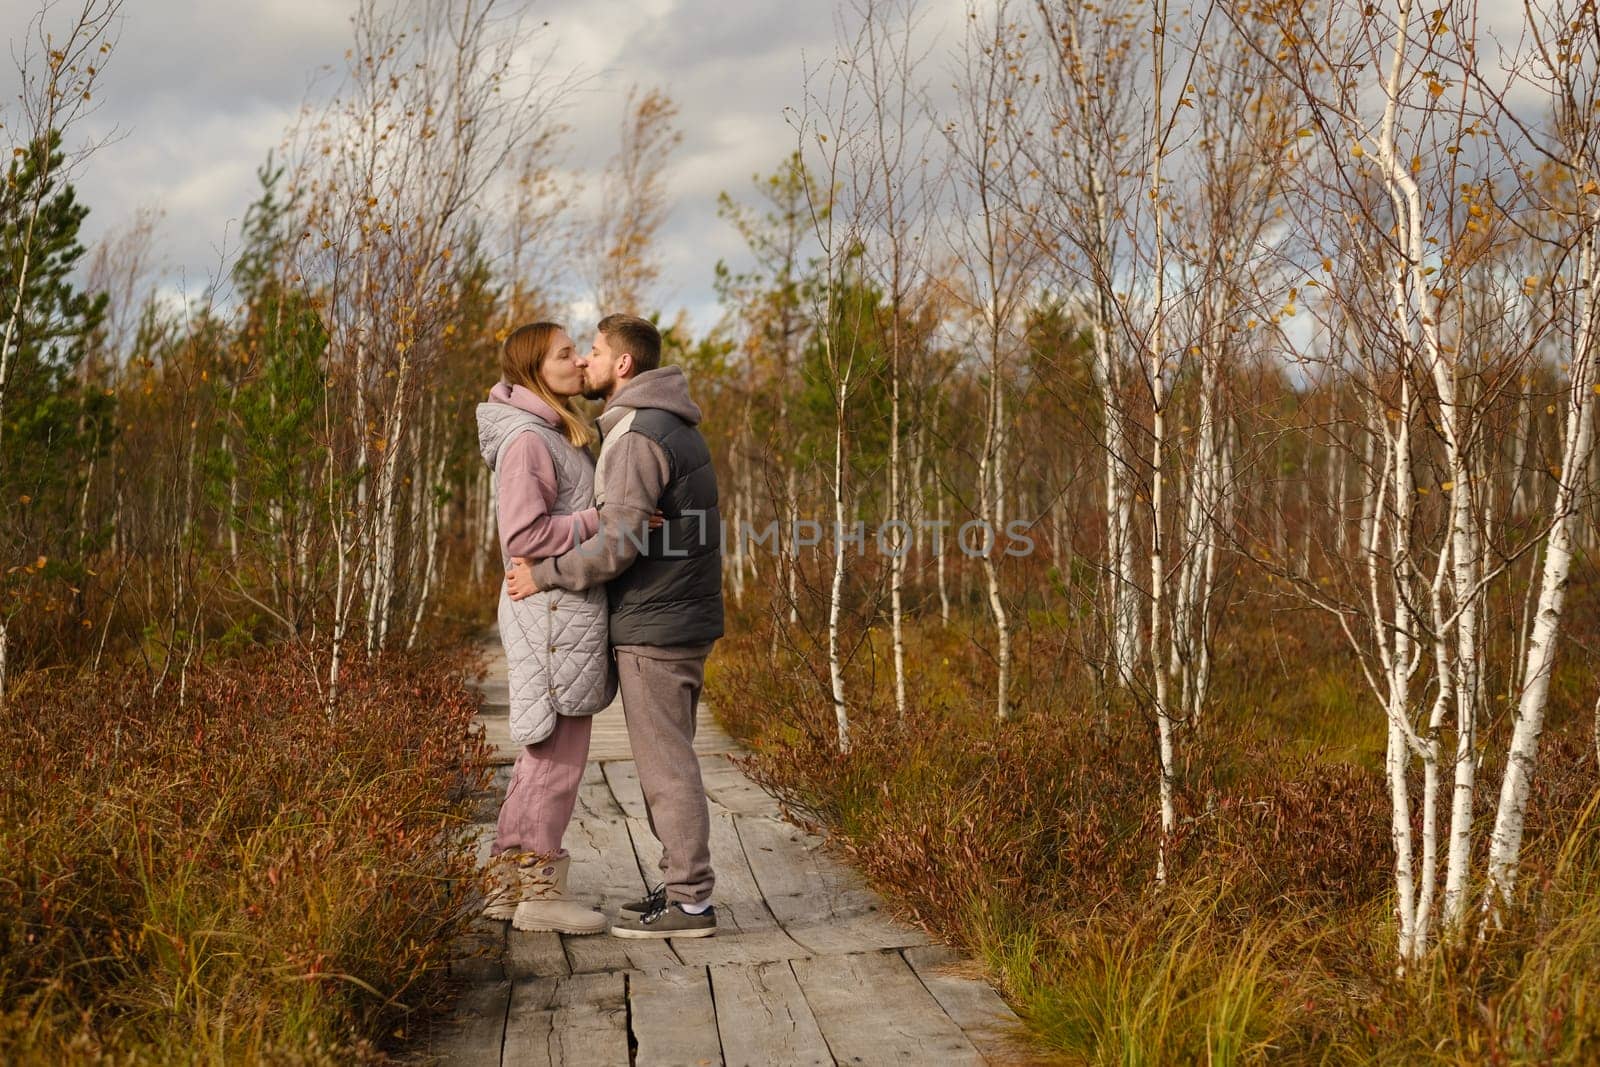 Tourists with backpacks kiss a wooden path in a swamp in Yelnya, Belarus by Lobachad